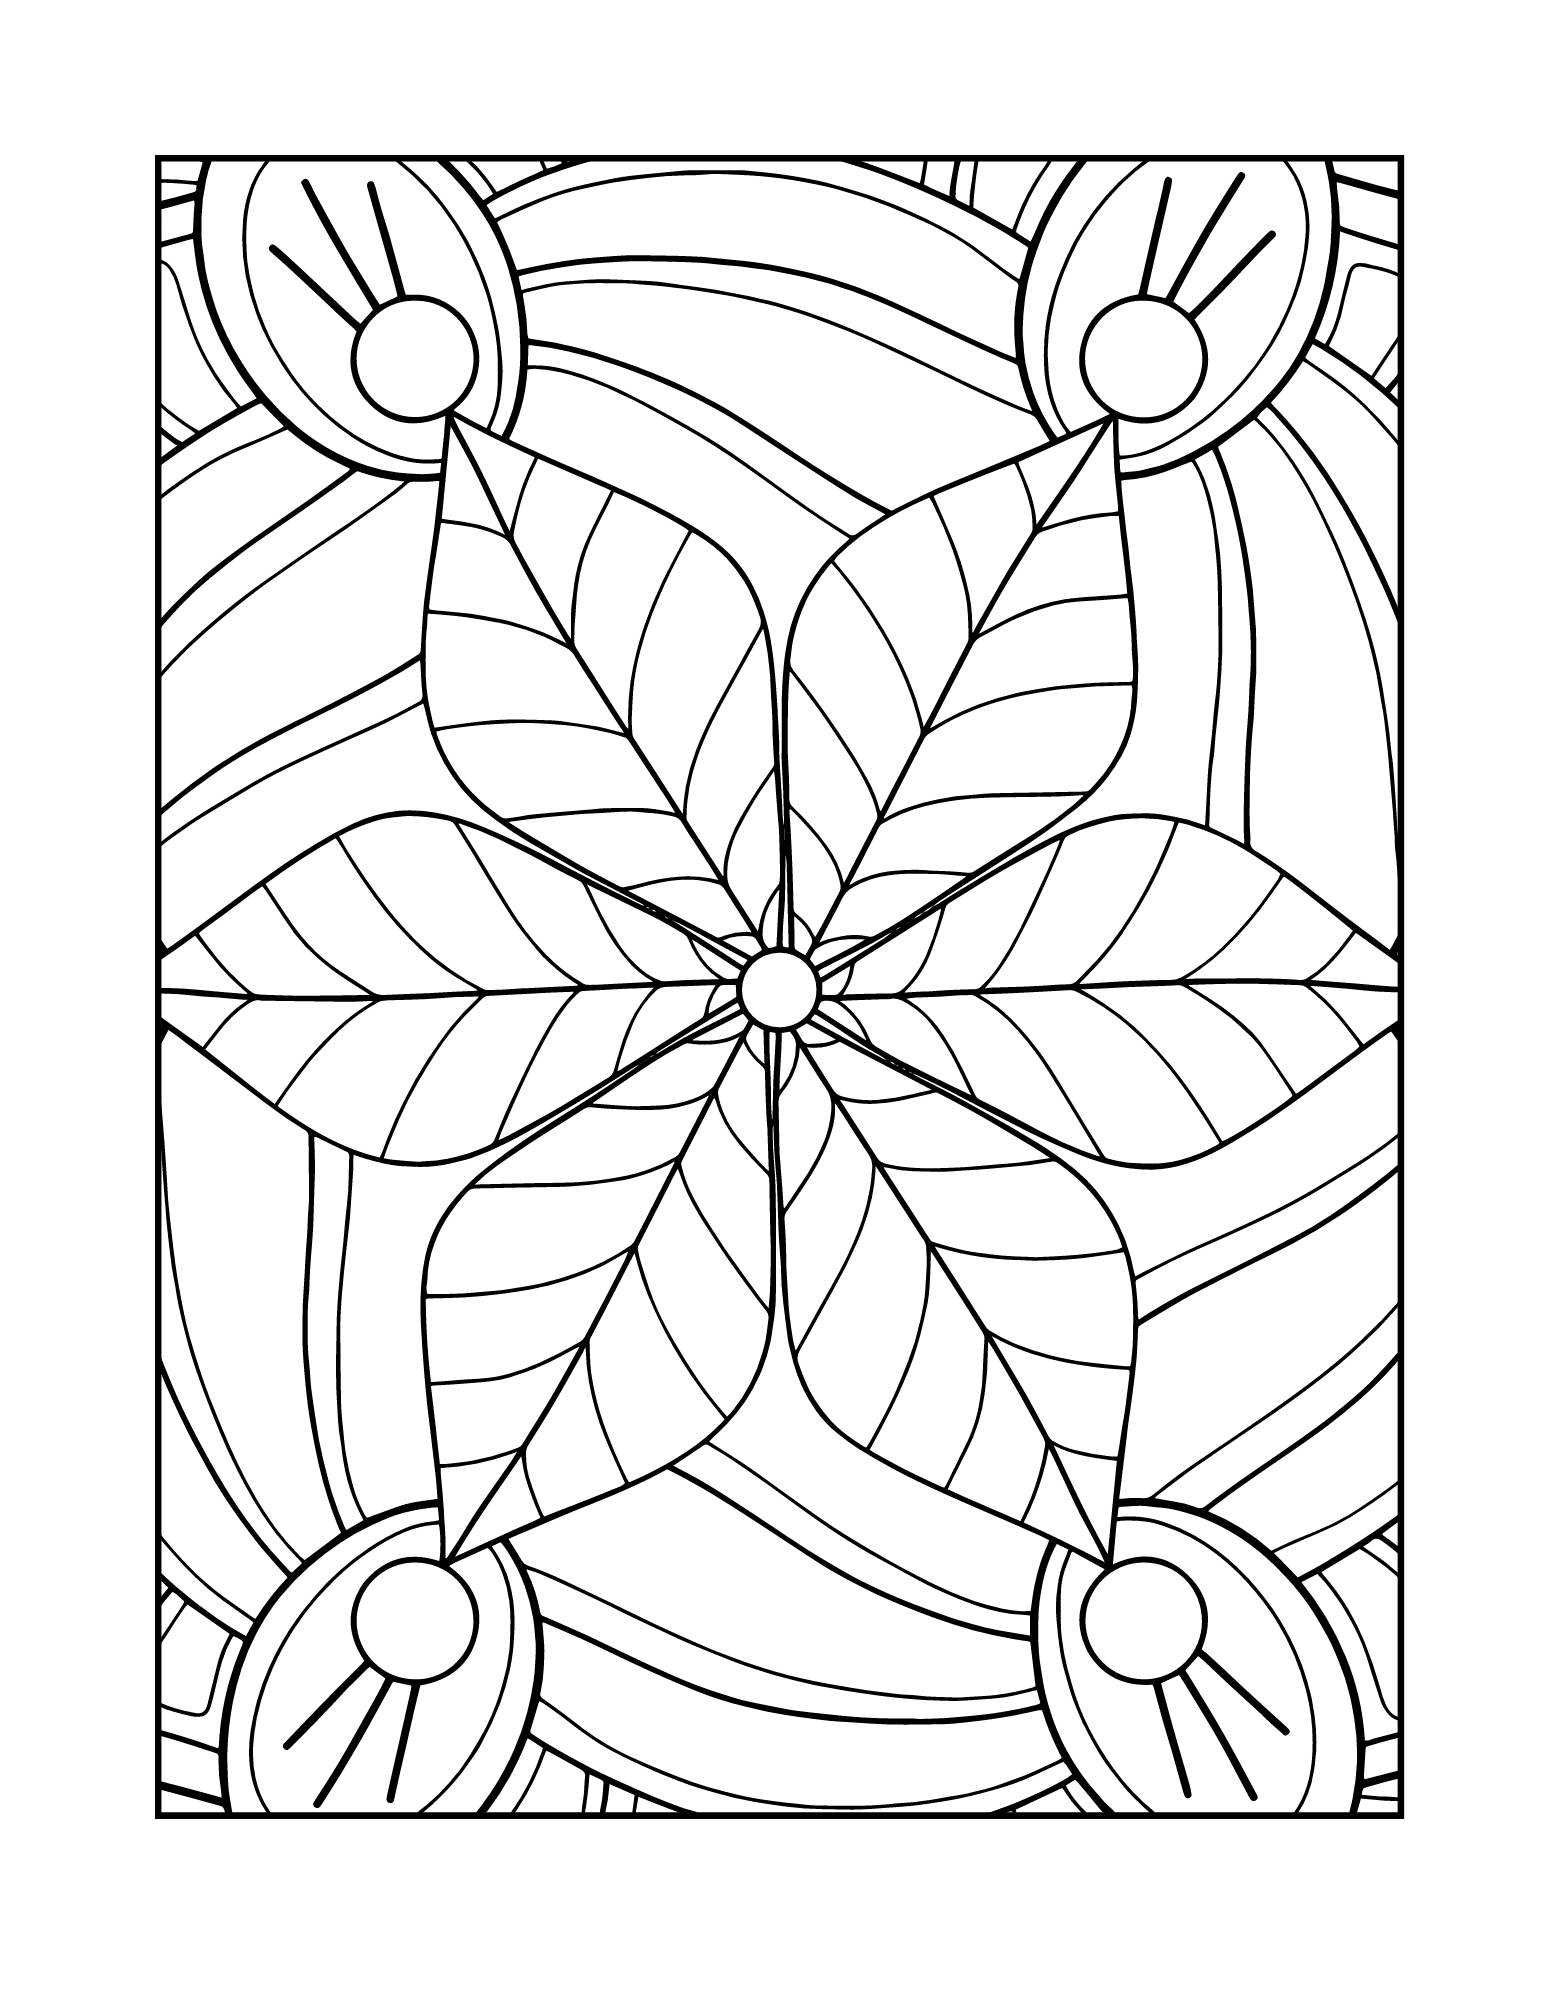 Mandala Tracing Book for Adults Relaxation. Coloring Pages 